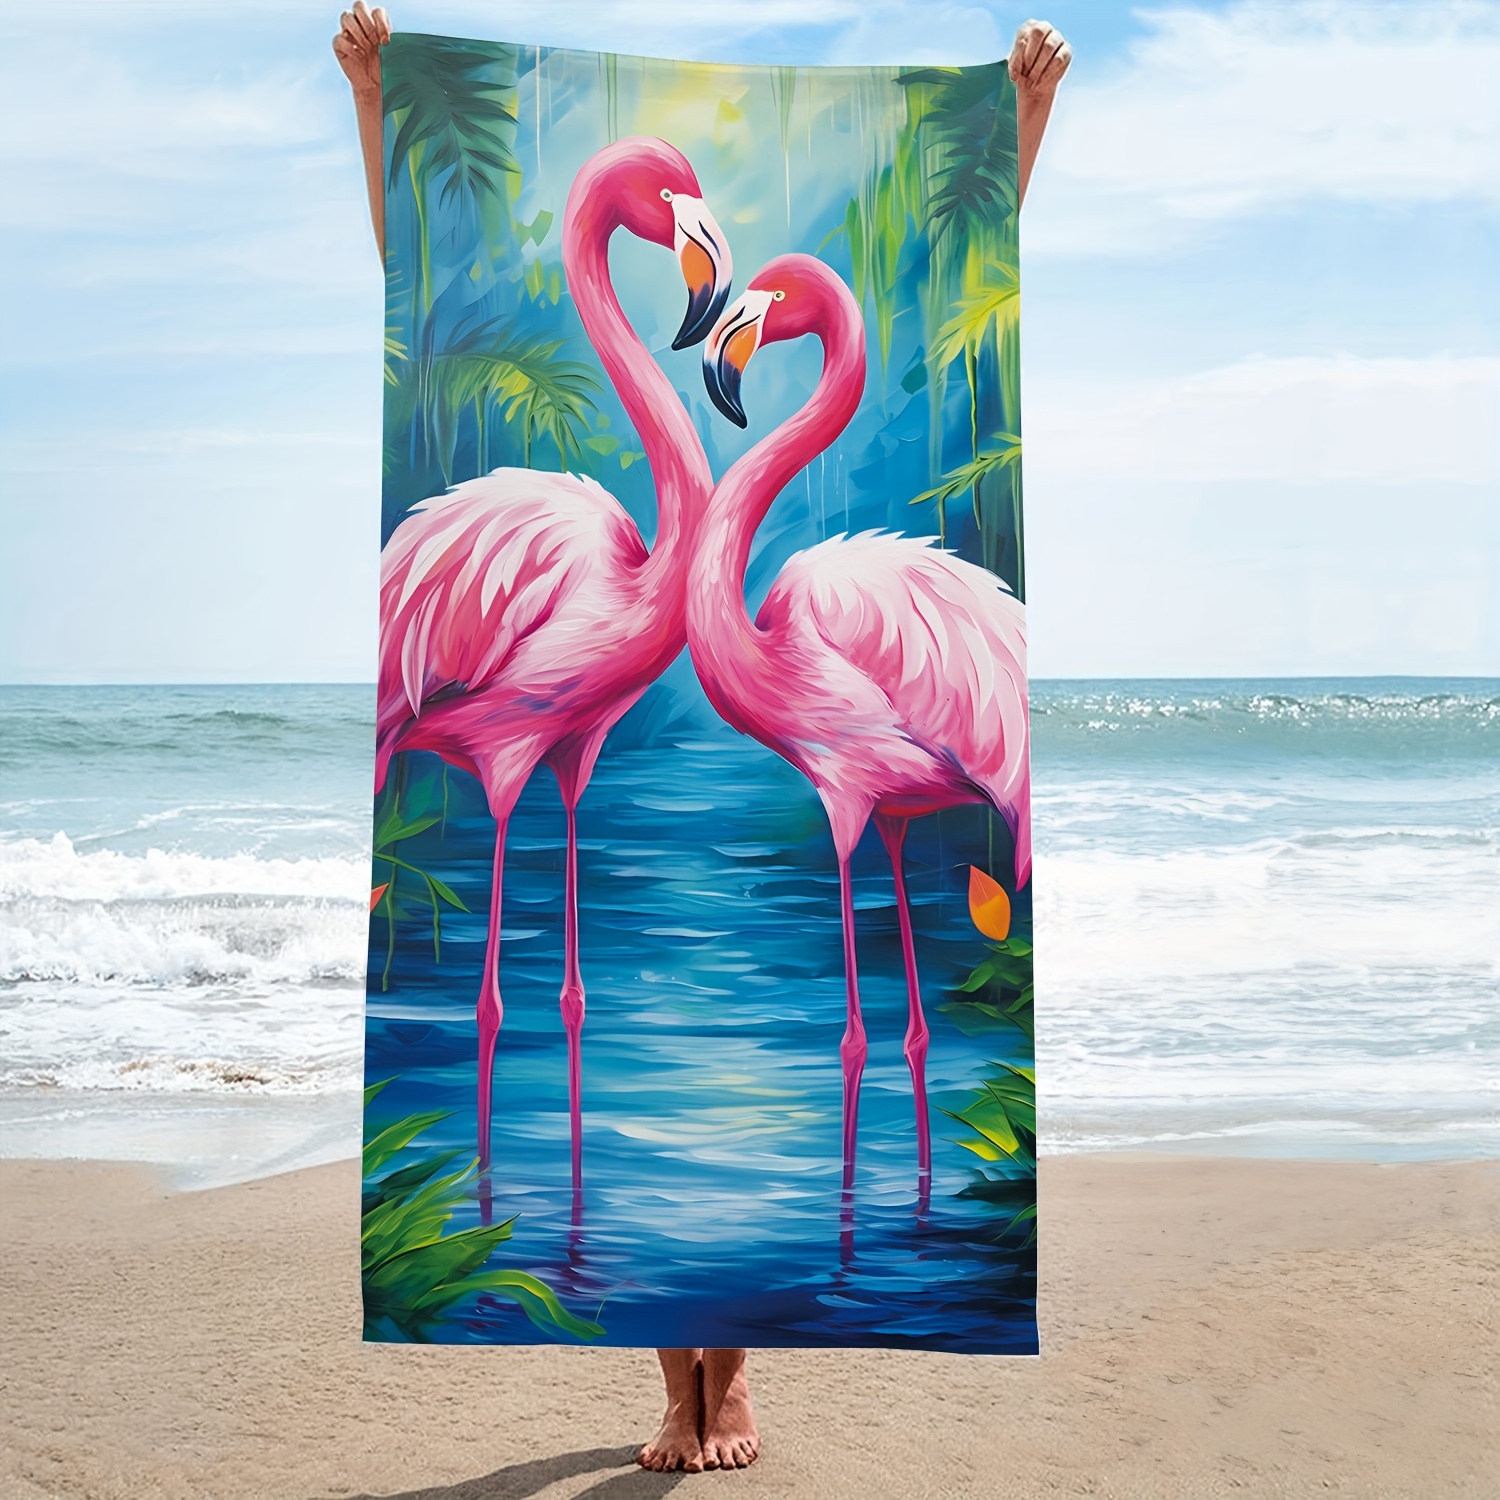 

1pc Flamingo Microfiber Oversized Beach Towel, Durable Quick Drying Sunscreen Washable Bath Towel, Summer Beach Camping Swimming Pool Travel Essentials